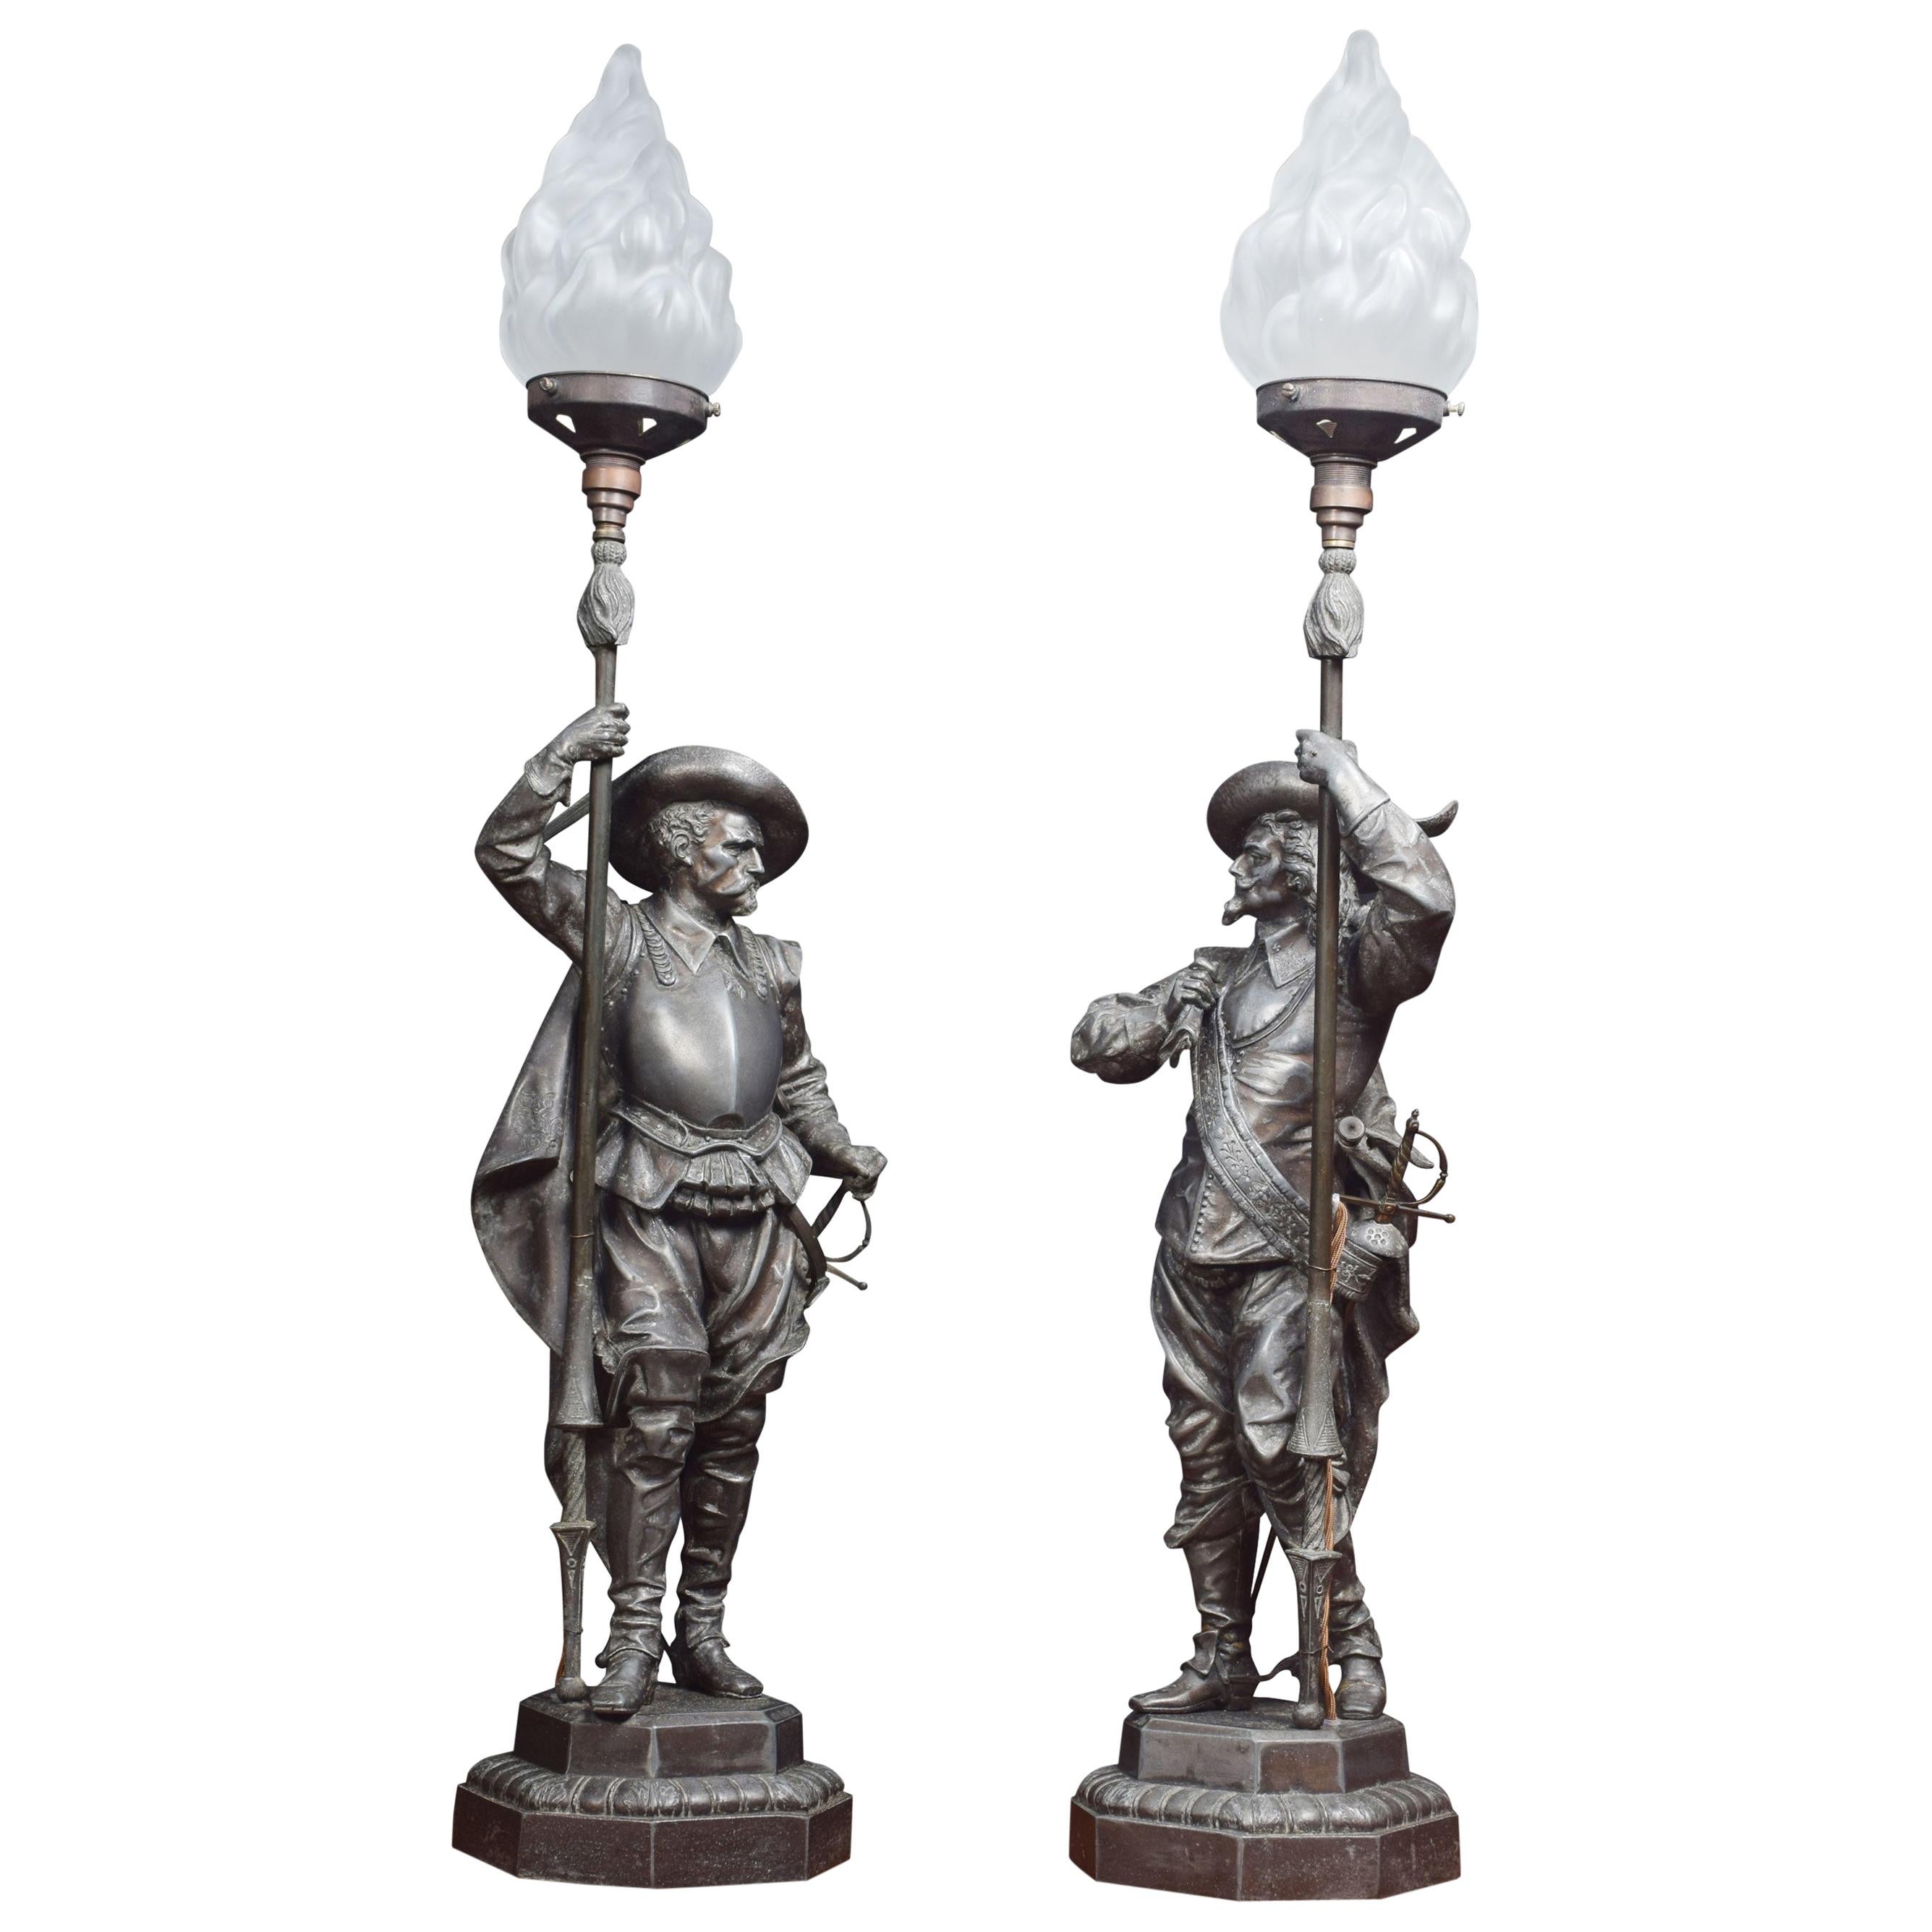 Pair of French Renaissance Soldier Holding a Lamp